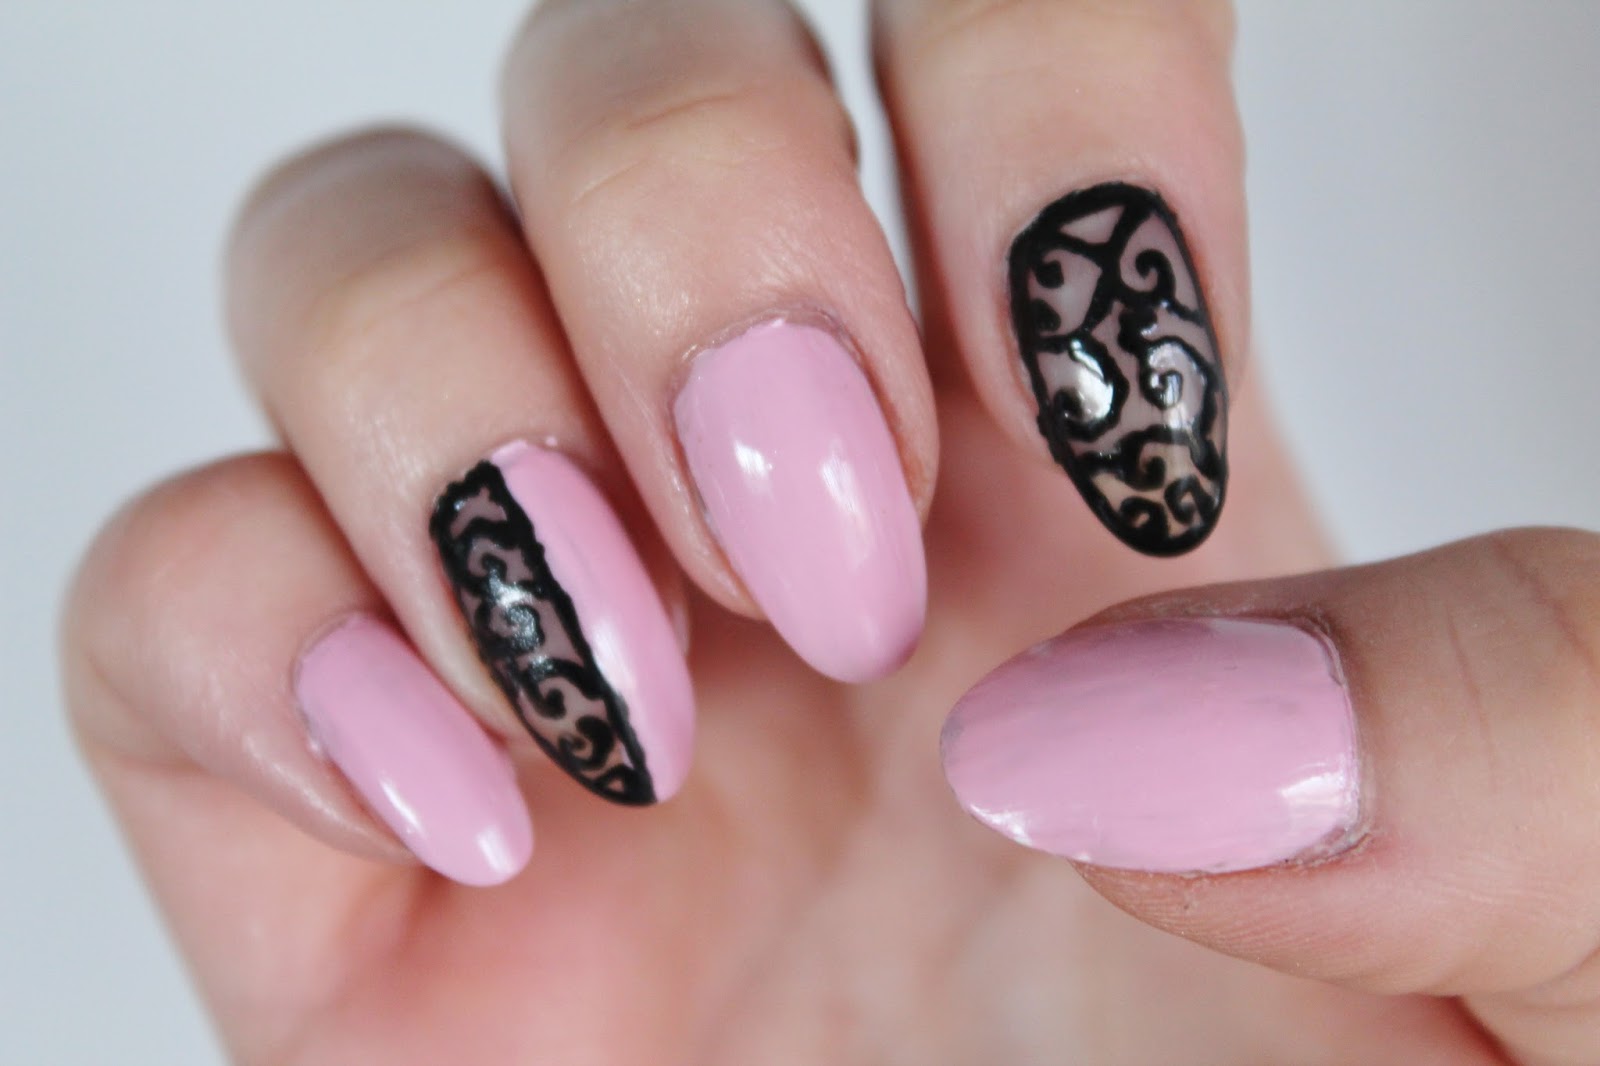 9. Negative Space Line Nail Art - wide 3